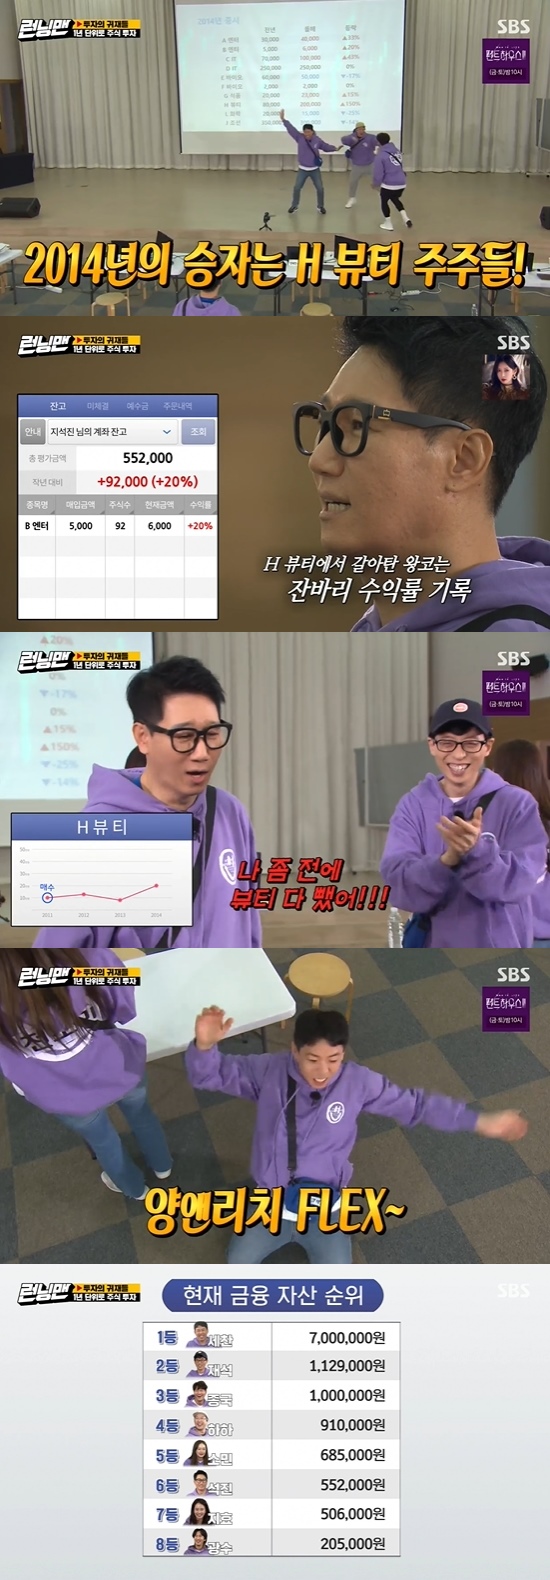 Running Man Yang Se-chan has become a staple of investmentOn SBS Good Sunday - Running Man broadcasted on the 21st, members were drawn to become a master of investment.The stock investment race began on the day, with members starting investing in running money of 500,000 won, and three investment times were available for purchase and sale in private money.The information needed was available.First, the stock market opened in 2011; Yang Se-chan proudly entered the stock exchange, saying, The king ants are here.Ji Suk-jin, who bought HBeauty information, told Jeon So-min, Yang Se-chan to buy Andreu Buenafuente after buying all of HBeauty shares.Yoo Jae-Suk, who overheard this, also bought Andreu Buenafuente.Unlike Ji Suk-jins forecast, Andreu Buenafuente rose 900%, while Yang Se-chan had a whopping 540% return.Yang Se-chan bought G food after obtaining information that Andreu Buenafuente was falling.But he lied to Jeon So-min, Lee Kwang-soo, that he could have another two years of Andreu Buenafuente.Andreu Buenafuente has plunged more than 80 percent, and Yang Se-chan, who switched to IT, said: Im Young and Rich.Jeon So-min told Yang Se-chan, You told me you had Andreu Buenafuente, but Yang Se-chan said, Do you hear all about me?About raised: Andreu Buenafuente, who had HBeauty so the yield was half-cut, Lee Kwang-soo said: Wheres my money.Gimme my money. Ji Suk-jin, who bought HBeauty, did not believe that K - Beauty was good at this time.Then the mission to get information points began: The first discussion topic was: Who will win if Yoo Jae-Suk and Ji Suk-jin fight with power?Yoo Jae-Suk and Ji Suk-jin showed off their respective powers with kicks; Ji Suk-jin said: He doesnt beat his 30-year sentence.Its right, but its right, but sometimes its right when it happens, said Yoo Jae-Suk.The staff picked Yoo Jae-Suk, and the B team received three points each.The second topic of discussion was Kim Jong-kook marries within three years; Kim Jong-kook stated: I dont know, Ill go as soon as I choose.Kim Jong-kook, who chose marrying as a costume, said, I will do it in three years, but the members who chose I can not responded, Women should like it together.Lee Kwang-soo said, Kim Jong-kook will do it in three years, but if he does not, will he stay still?Jeon So-min tried to say, I should not think of this, but I think I might not be able to hear it, but Kim Jong-kook quickly blocked the mouth of Jeon So-min.If you say you cant, Ill introduce you to your sister, who is one year old, Yoo Jae-Suk said, adding that staff chose to marry.The winner of 2014 was H Beauty; up 150 percent; Ji Suk-jin was shocked Ive lost all of my beauty.The 2014 financial asset rankings showed Yang Se-chan to be the overwhelming first; the second was Yoo Jae-Suk.I had two years of HBeauty that was so unfair, and it surged as soon as I sold it, Ji Suk-jin said.Yang Se-chan all in FVaio, but shed her return-poor Lee Kwang-soo to buy EVaio.Lee Kwang-soo said, Its not time for me to play, but Yang Se-chan said to the end, EVaio is FDA approved.All In One Lee Kwang-soo on EVaio so the chapter closed in 2014.Soon after, in 2015, FVaio, which Yang Se-chan bought, was 500%, but EVaio, where Yang Se-chan spilled fake news, surged 1100%.The parasitic Lee Kwang-soo kneeled to Yang Se-chan, who was greeted bitterly.Ji Suk-jin, who only attacked Vaio, could not hide his smile. Ji Seo-jin, who saw Yang Se-chan, who totaled 45 million won, said, Is not it a good investment?Yang Se-chan then knew that EVaio shares were falling, but recommended EVaio to Lee Kwang-soo.Lee Kwang-soo unwittingly informed Yang Se-chan of G food information, and Yang Se-chan bought G food based on this.As a result, only Yang Se-chan earned revenue; Yang Se-chan, who surpassed 57 million won, said, You can buy a car in a little while.Song Ji-hyo, who was recommended EVaio by Yoo Jae-Suk and Yoo Jae-Suk, who had heard the first step information from Lee Kwang-soo and bought EVaio, could not speak.Ji Suk-jin laughed, saying, What do you do if you eat R money here? The actual account is down.Later, the crew handed Yang Se-chan a blank index, saying there was no change to go back.Photo = SBS Broadcasting Screen